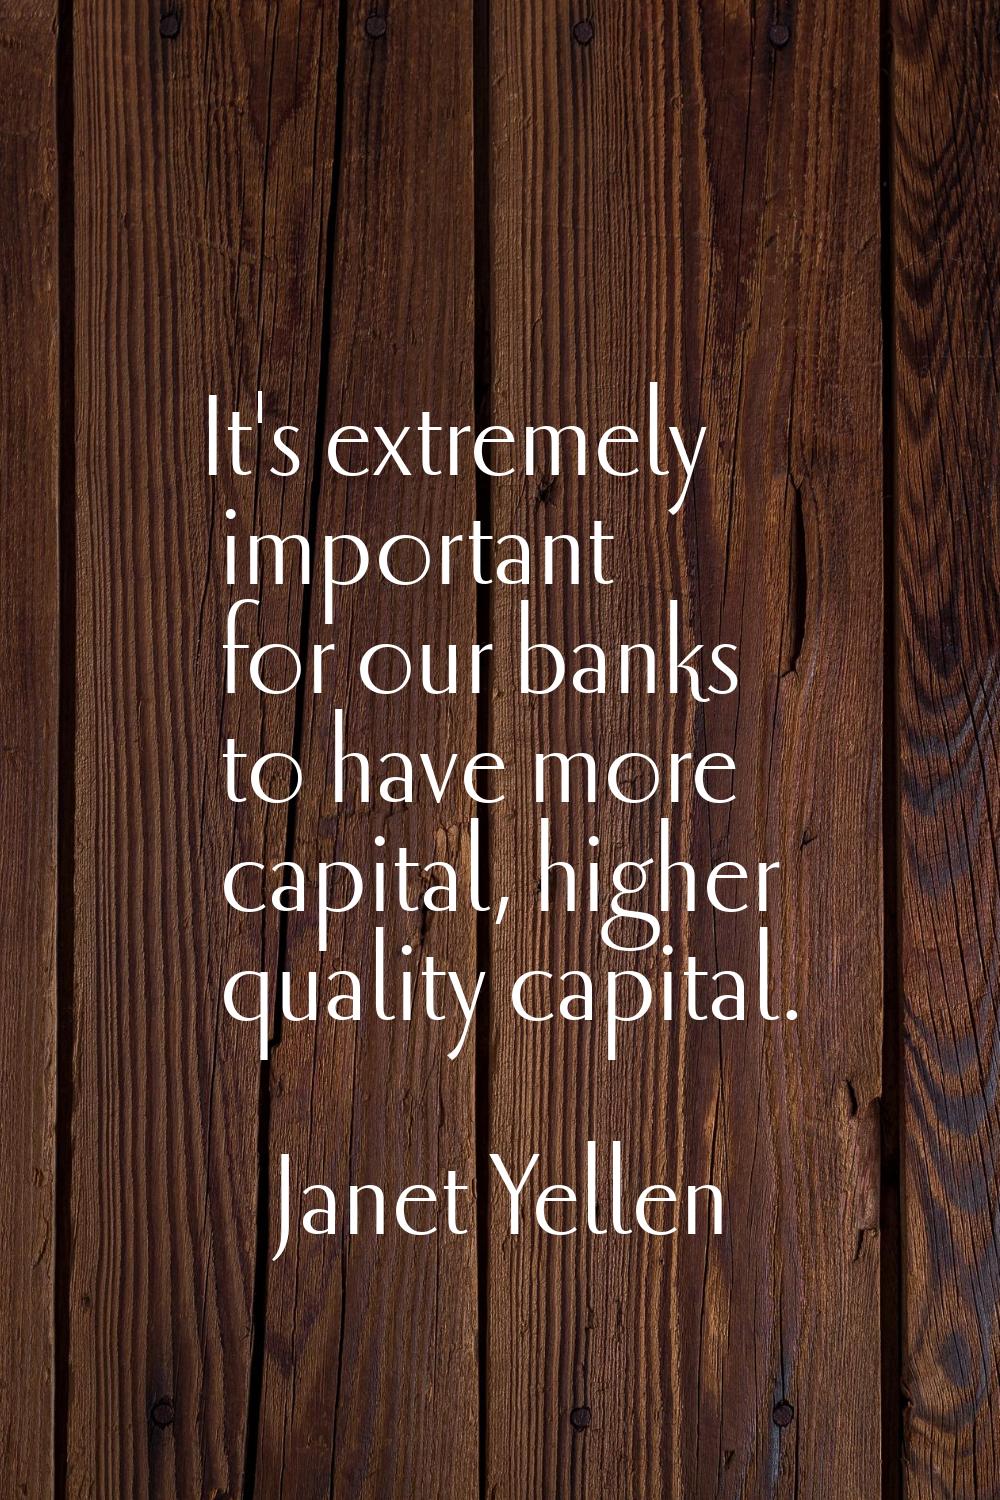 It's extremely important for our banks to have more capital, higher quality capital.